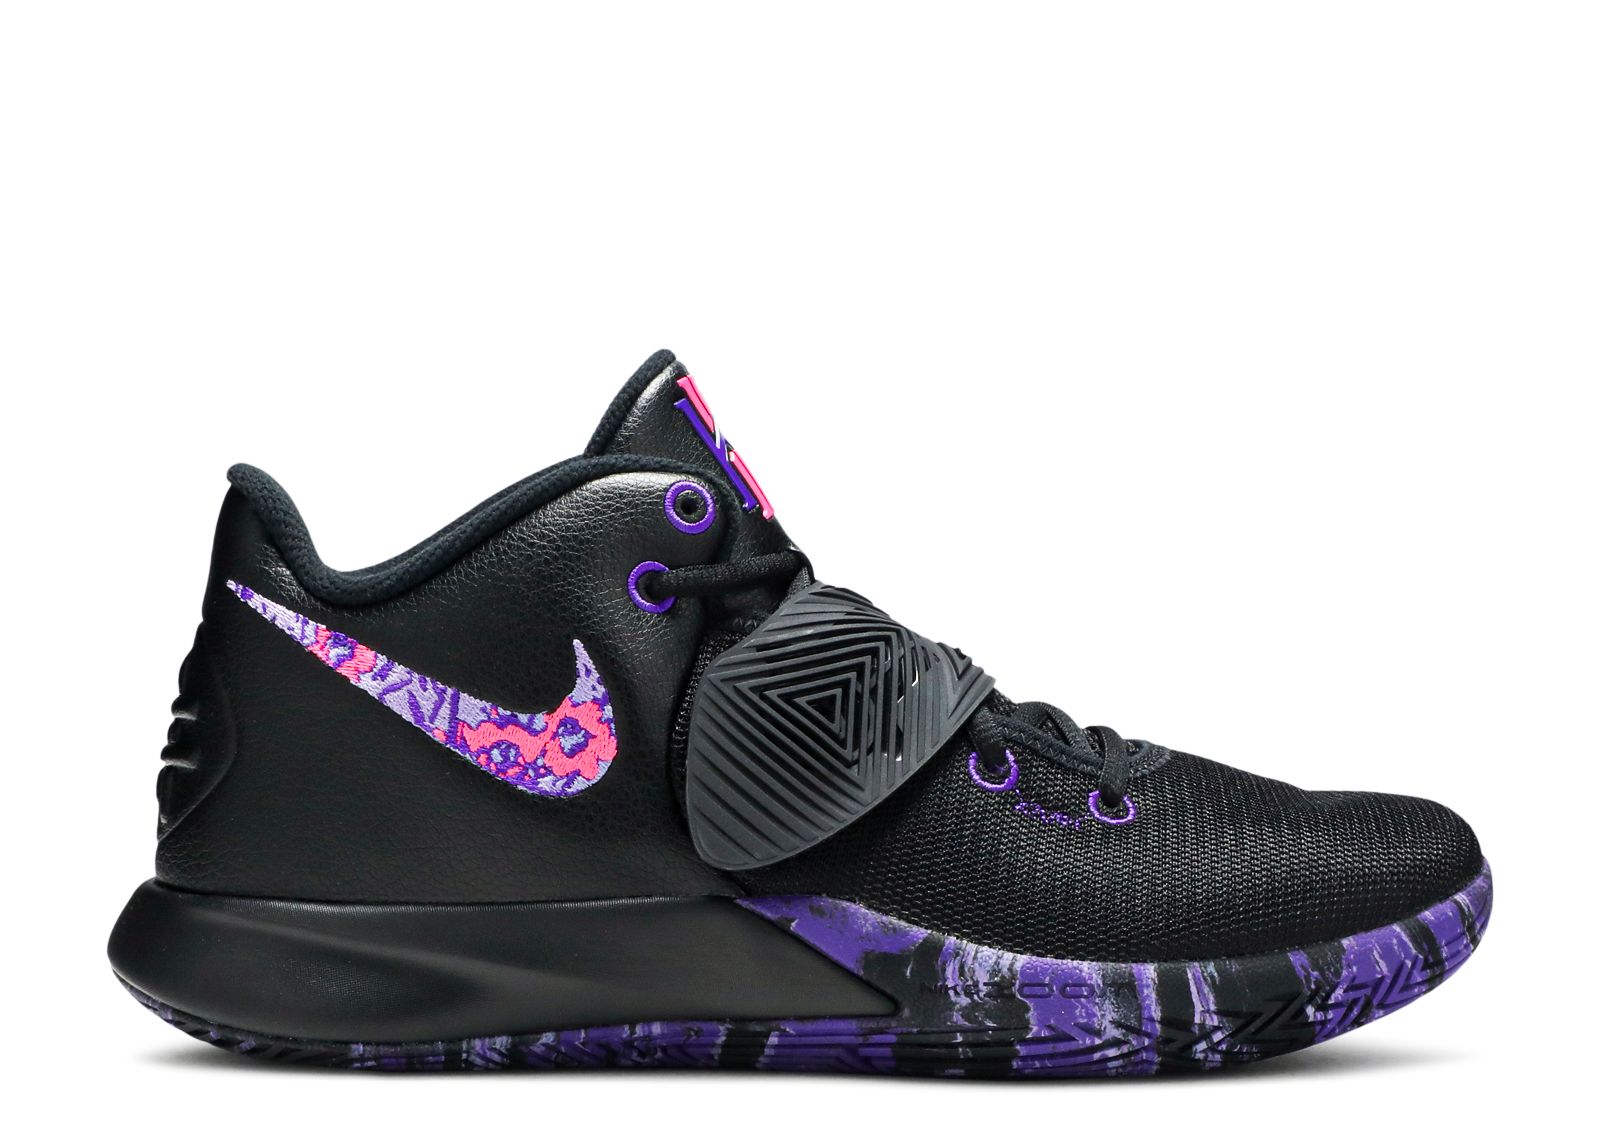 kyrie irving shoes black